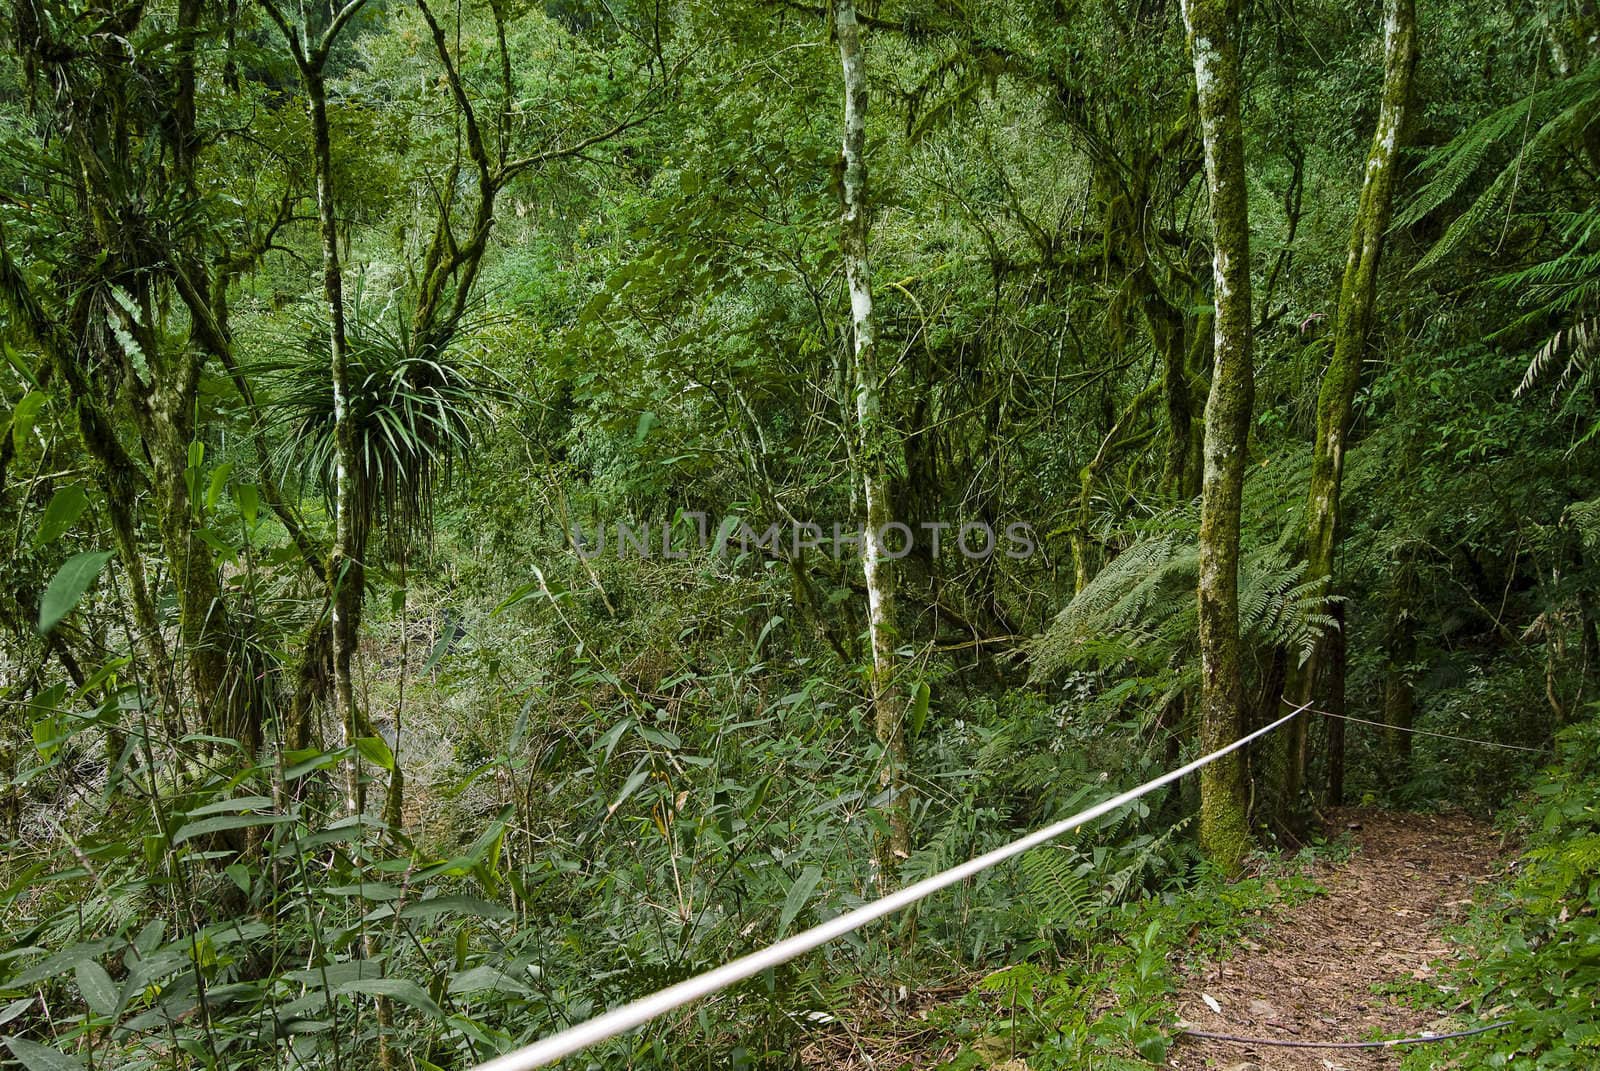 Track on the forest with handrail hopes.